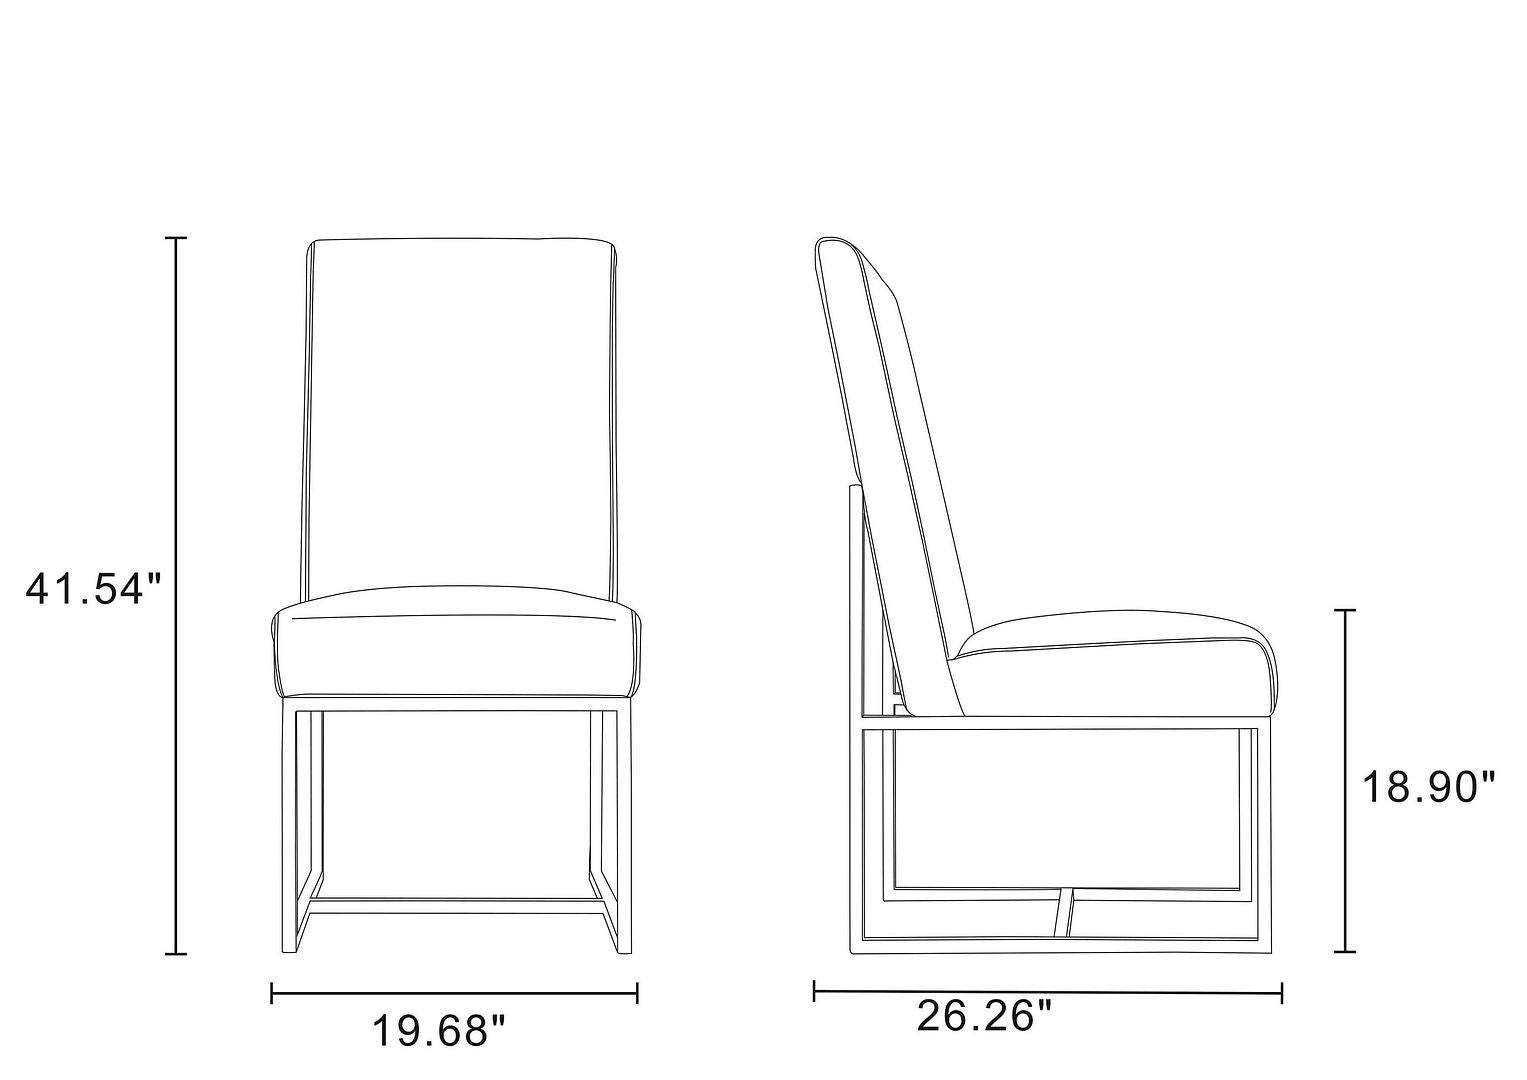 Element Dining Chair - Set of 2 - East Shore Modern Home Furnishings